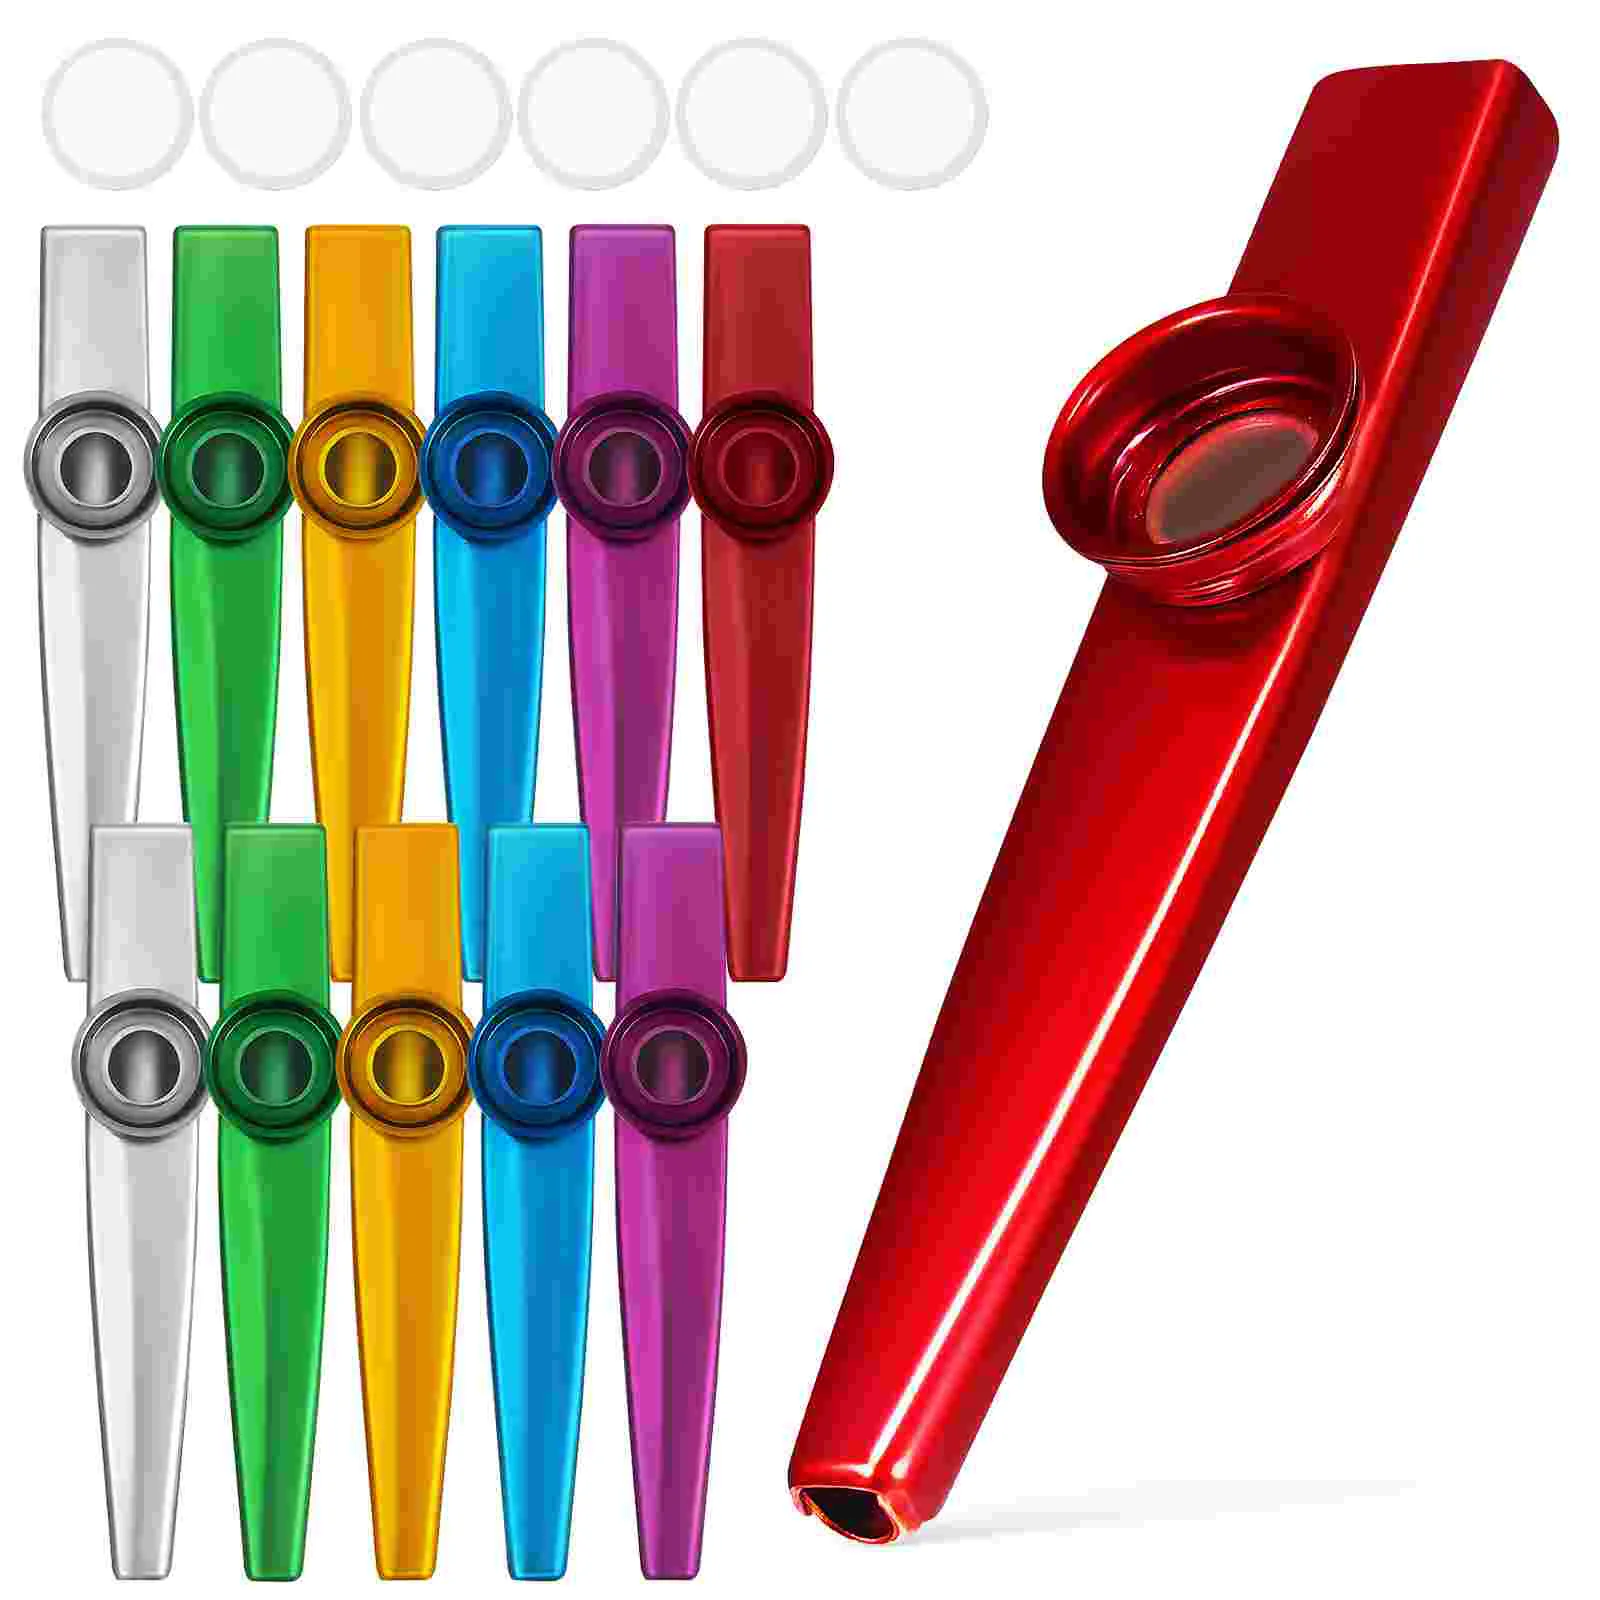 

Metal Kazoo With Diaphragms Lightweight Portable For Beginner Flute Instrument Music Lovers Simple Kazoo Child Gift